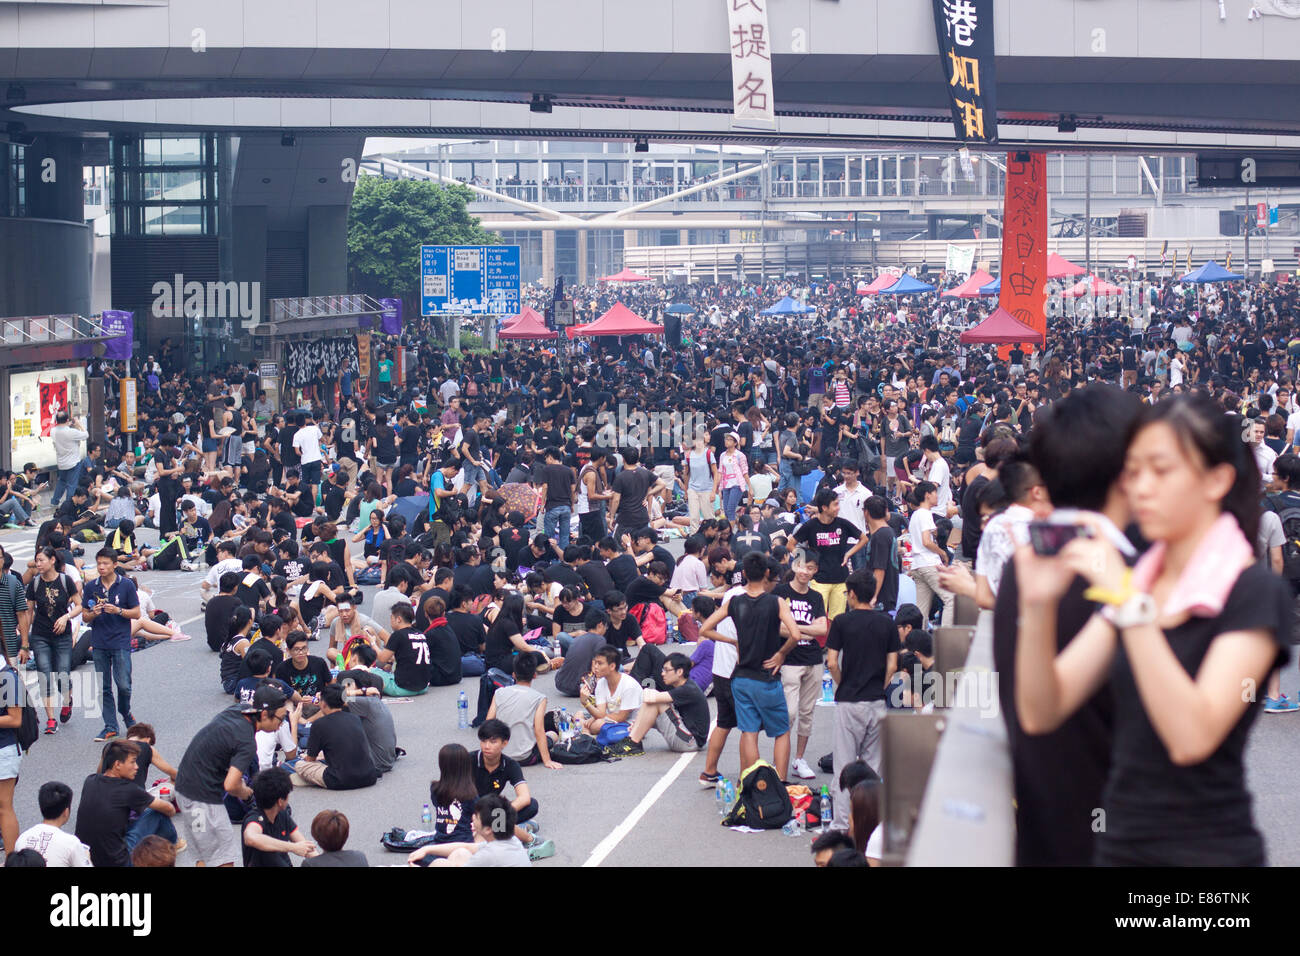 Hong Kong. 30th September, 2014. Crowds on the roads in Admiralty district.  Protests against decision by Beijing to offer Hong Kong voters, choice of candidates for Chief Executive in 2017 elections from approved list of candidates, rather than an open list. Credit:  SCWLee/Alamy Live News Stock Photo